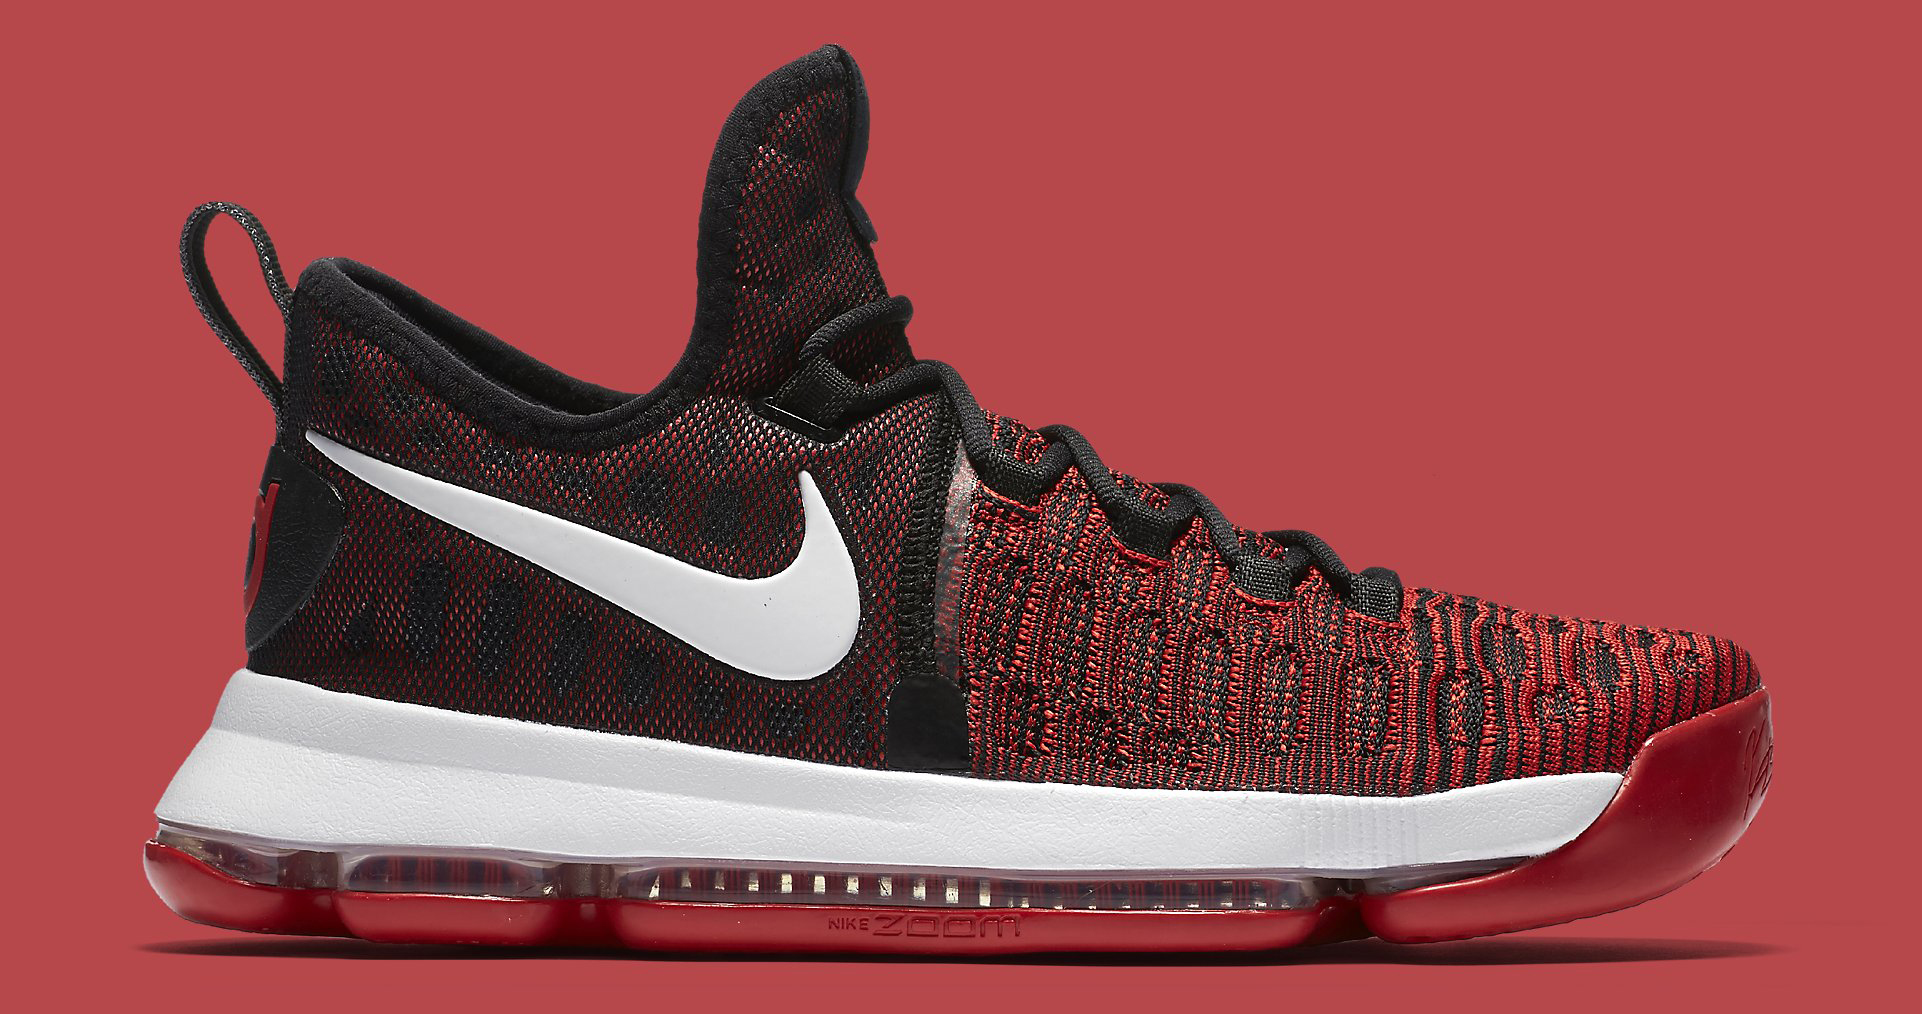 red and black kds